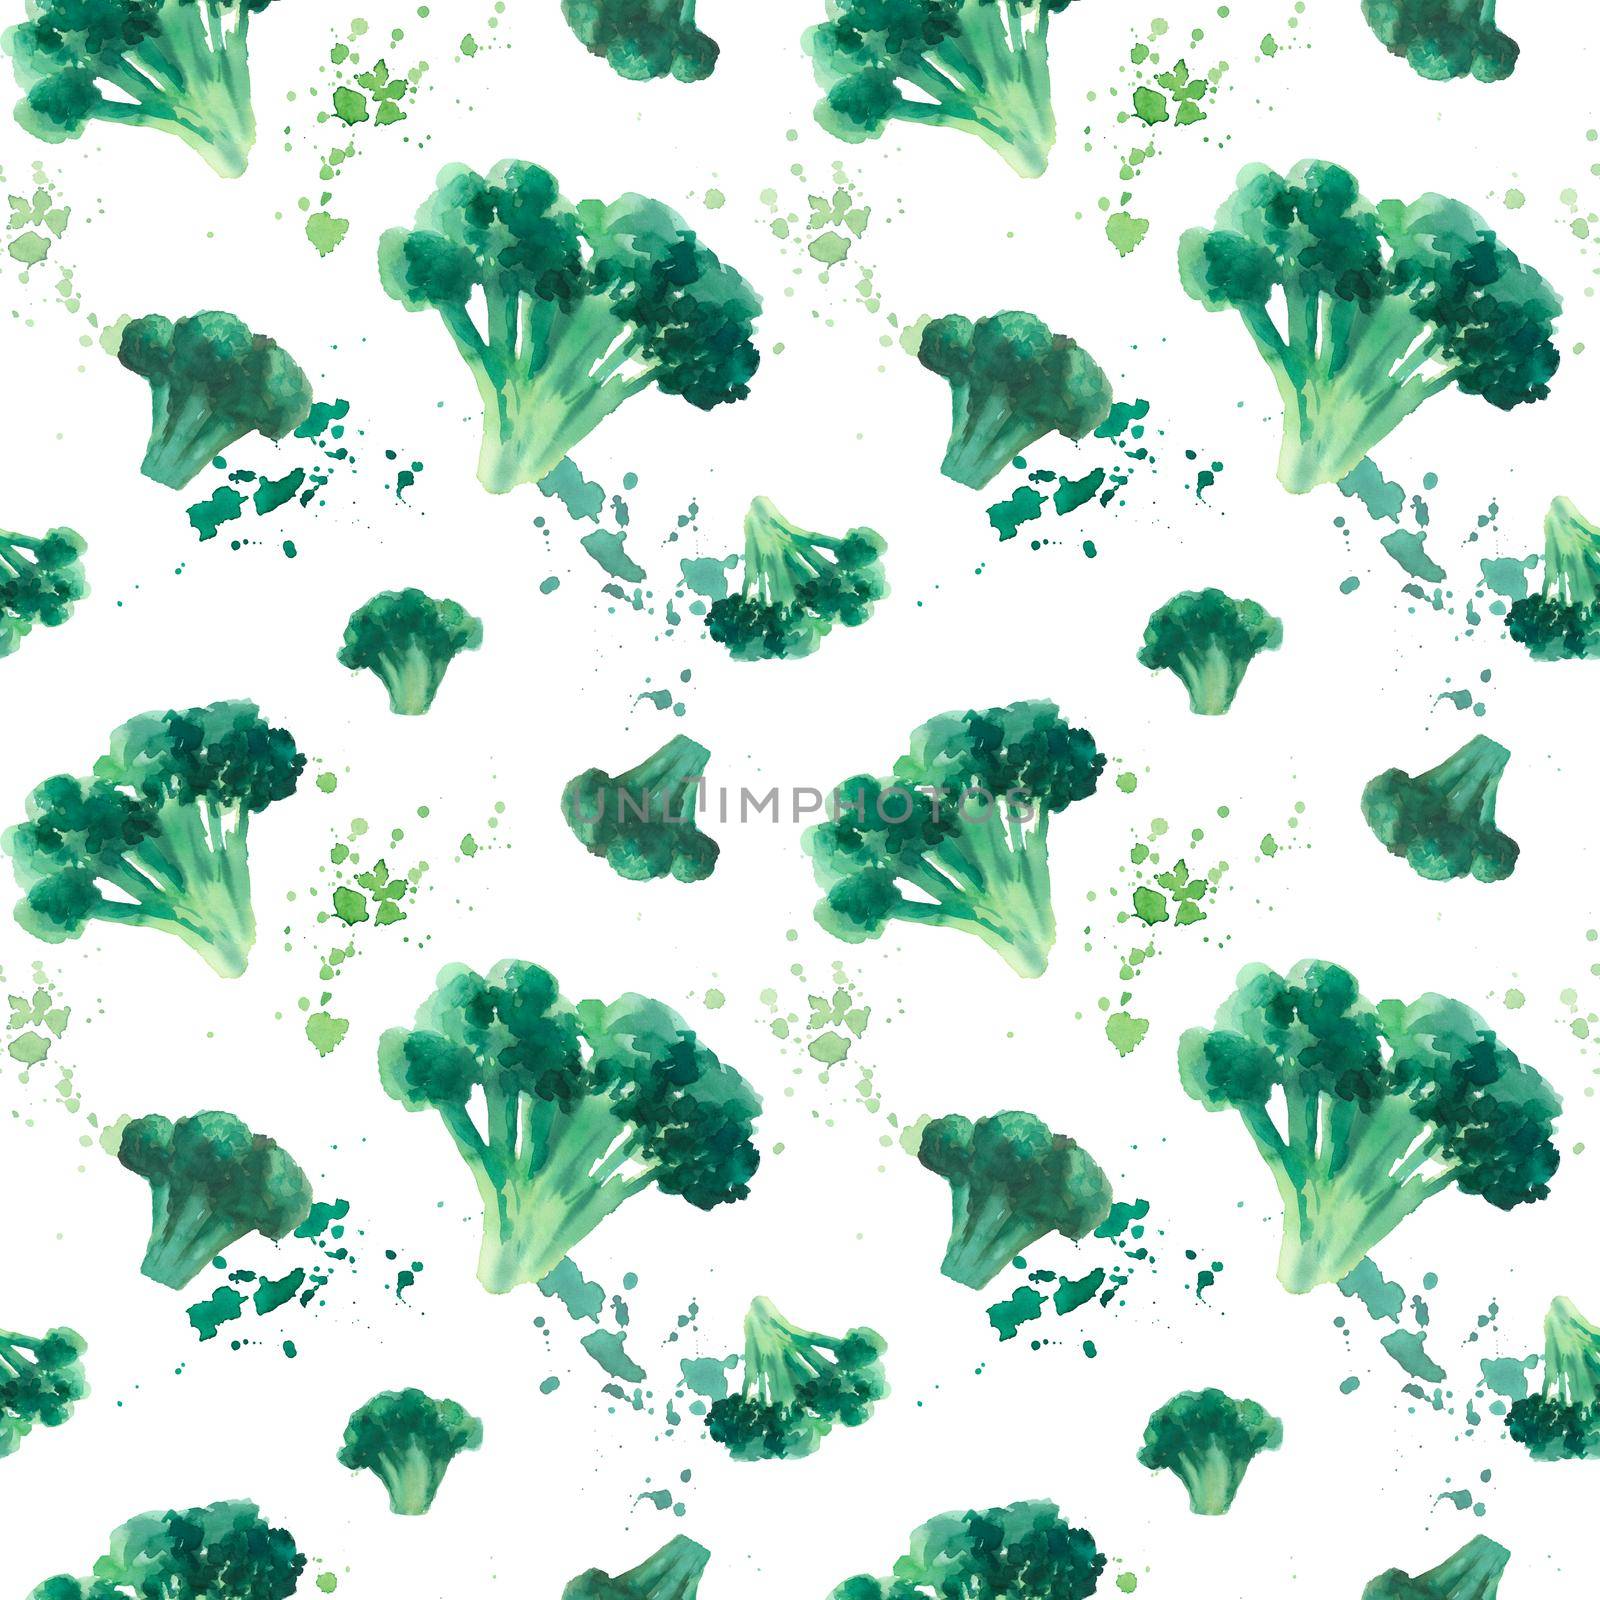 Watercolor seamless pattern with vegetables broccoli and splashes of paint on white. Endless green Pattern for kitchen textiles